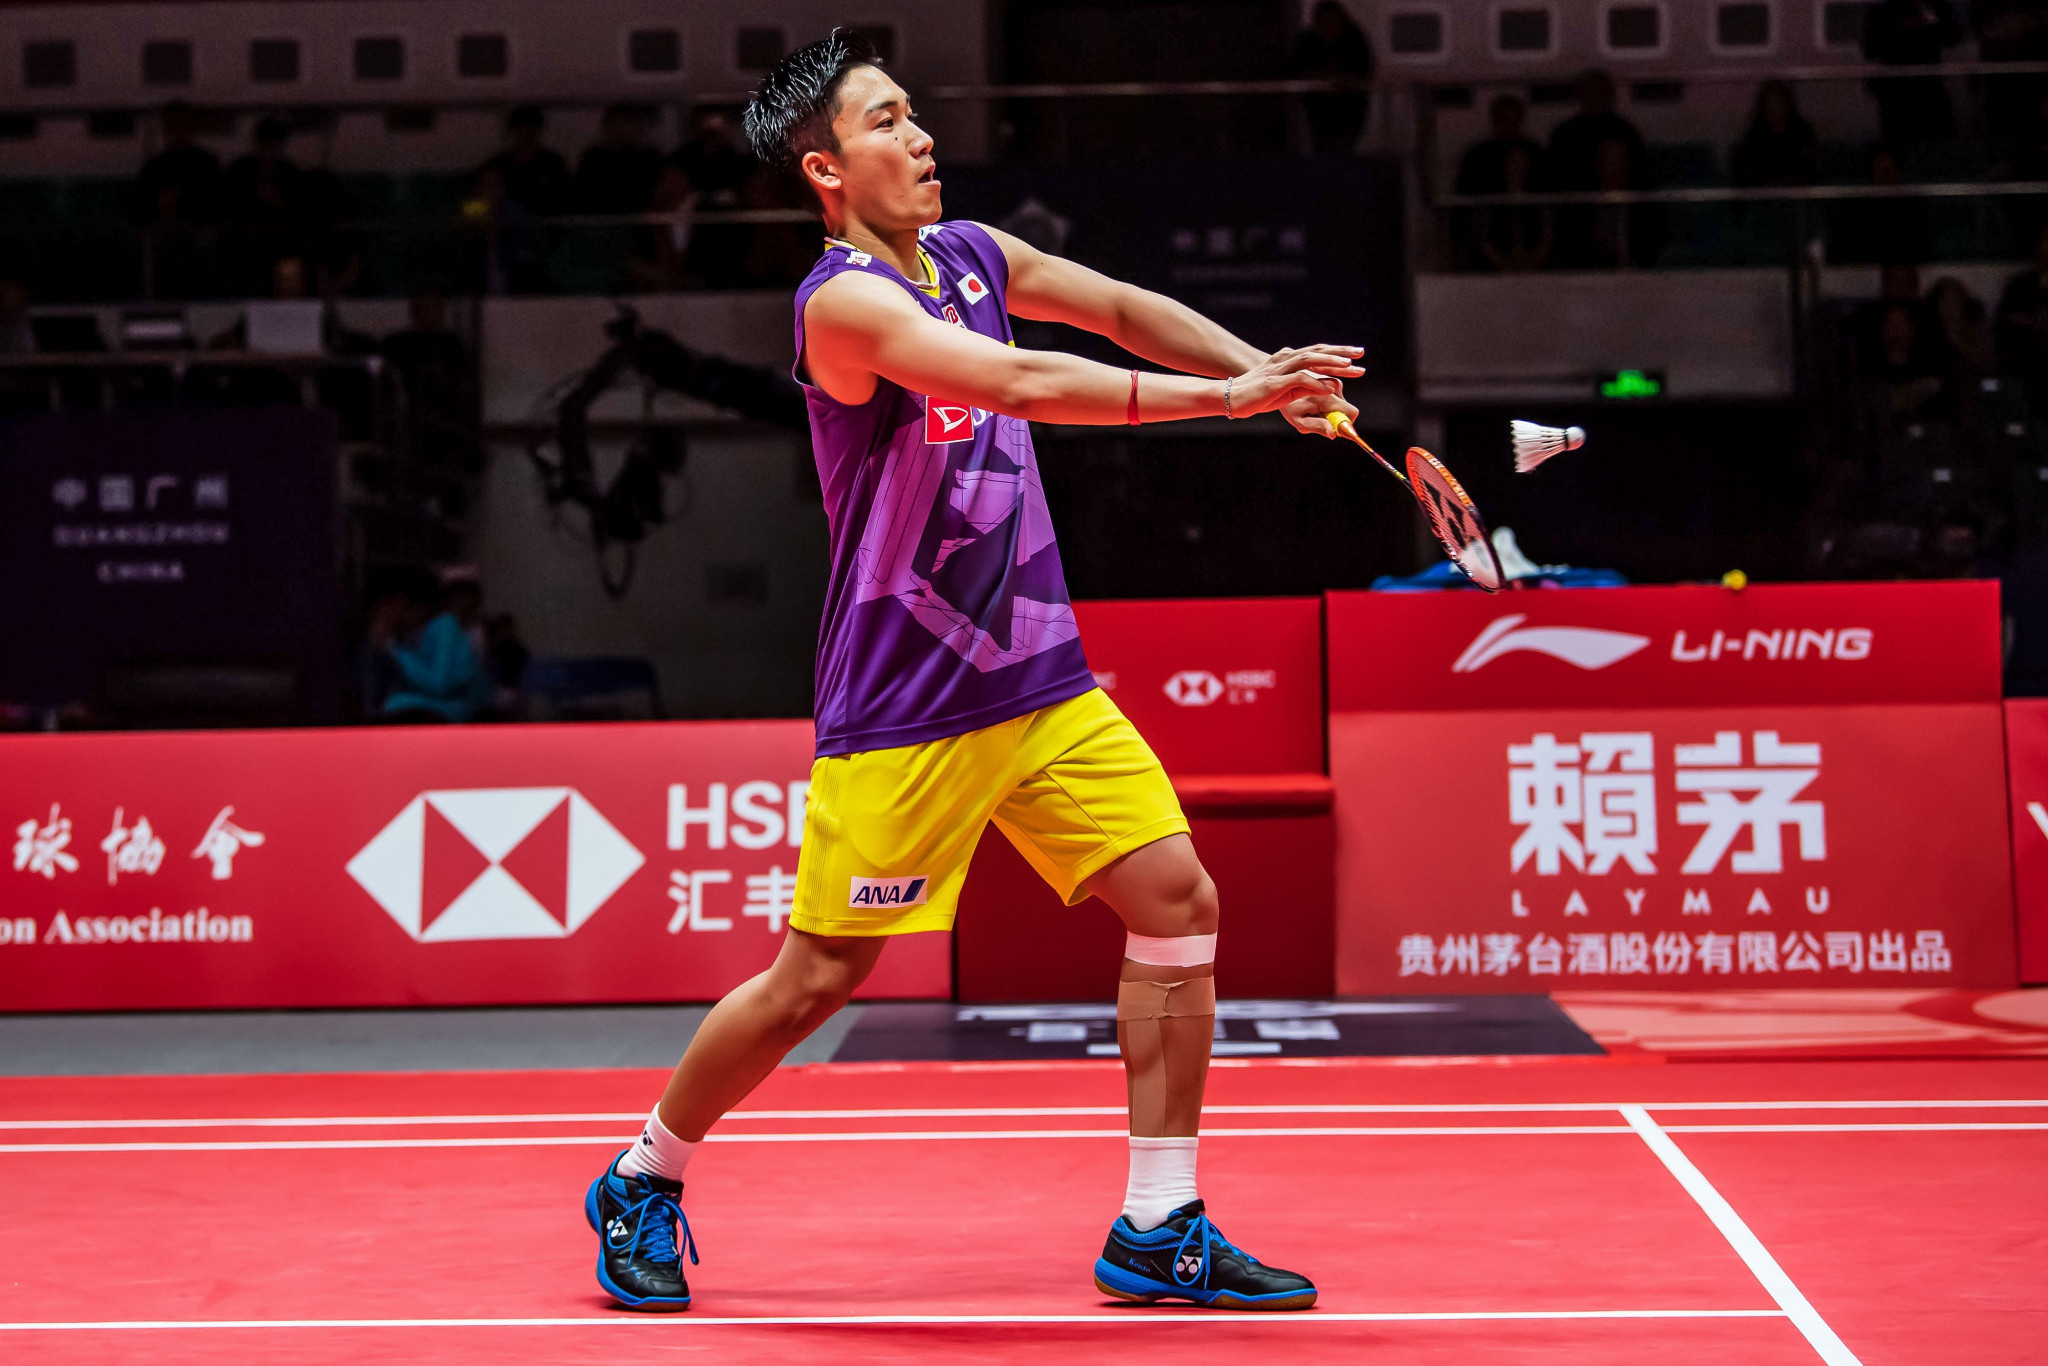 World champion Kento Momota en route to an opening win at the BWF World Tour Finals in China ©Getty Images